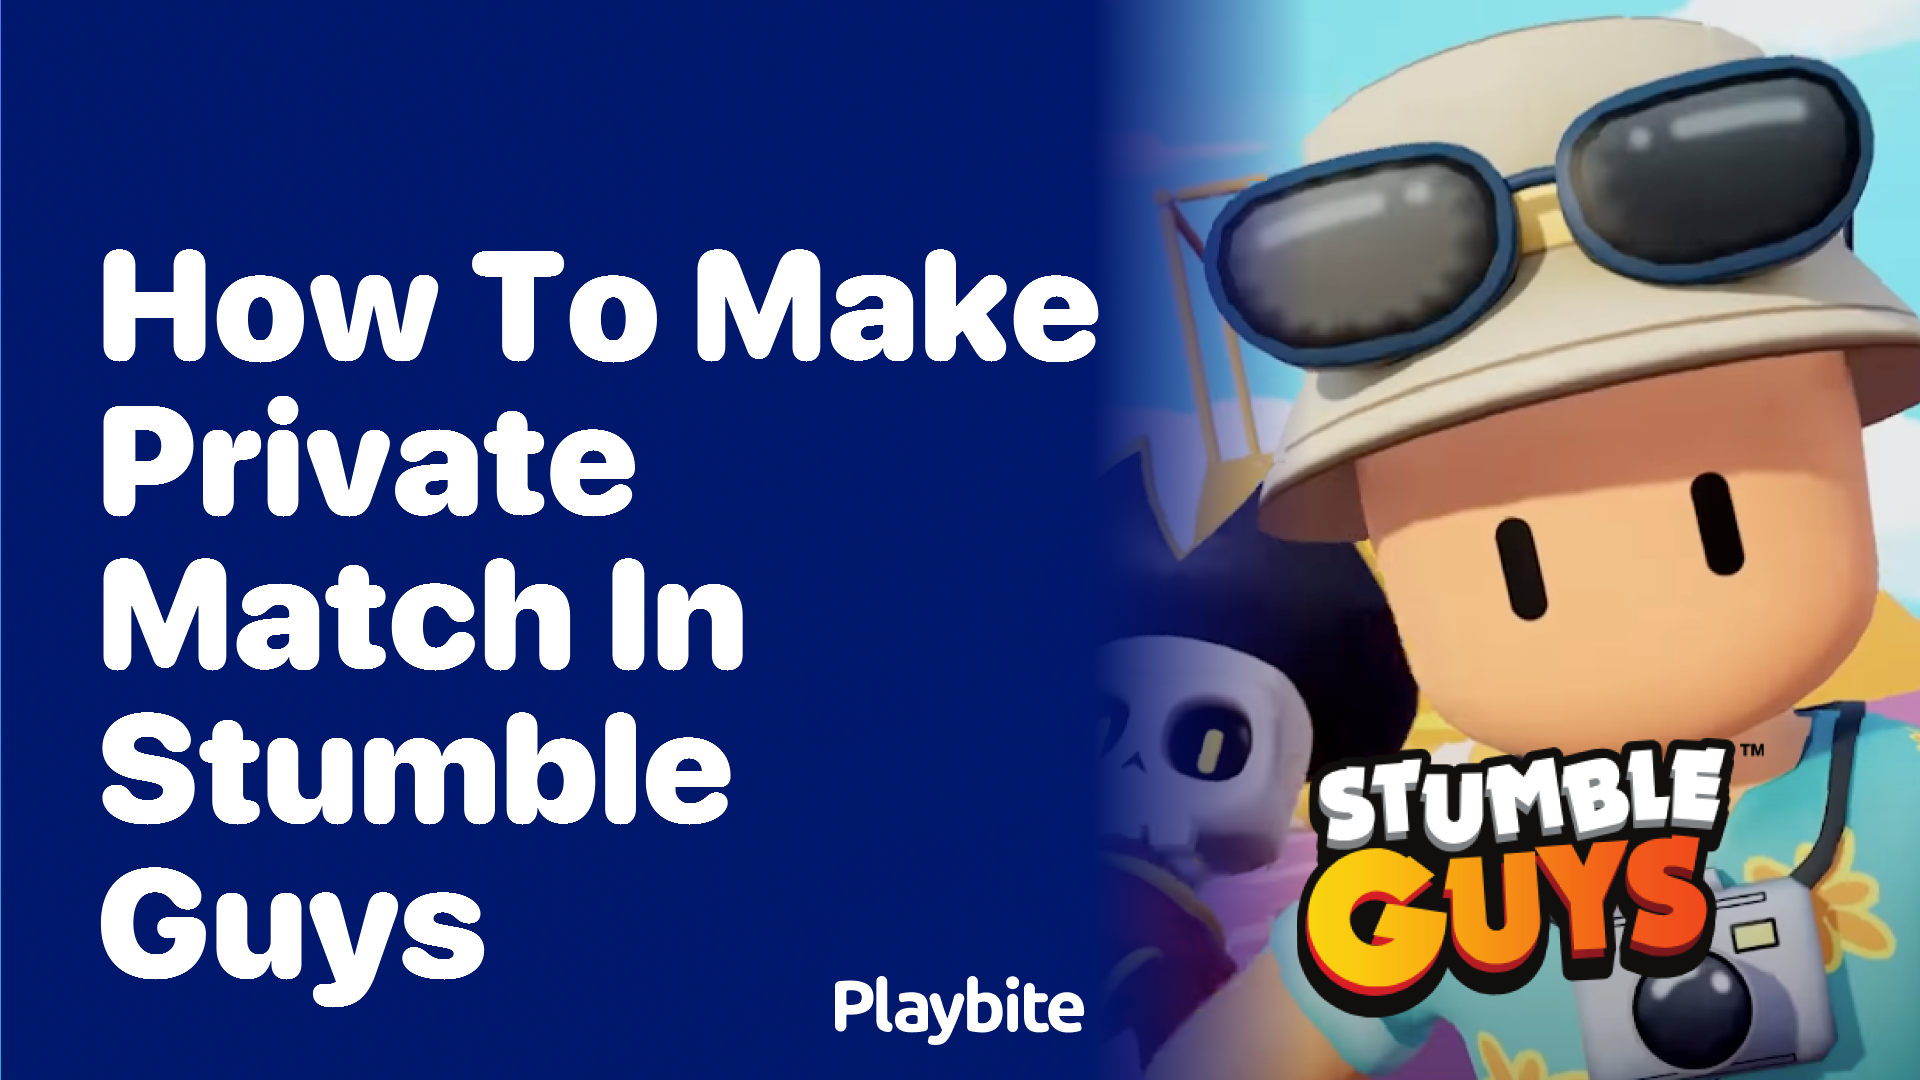 How to make a private match in Stumble Guys